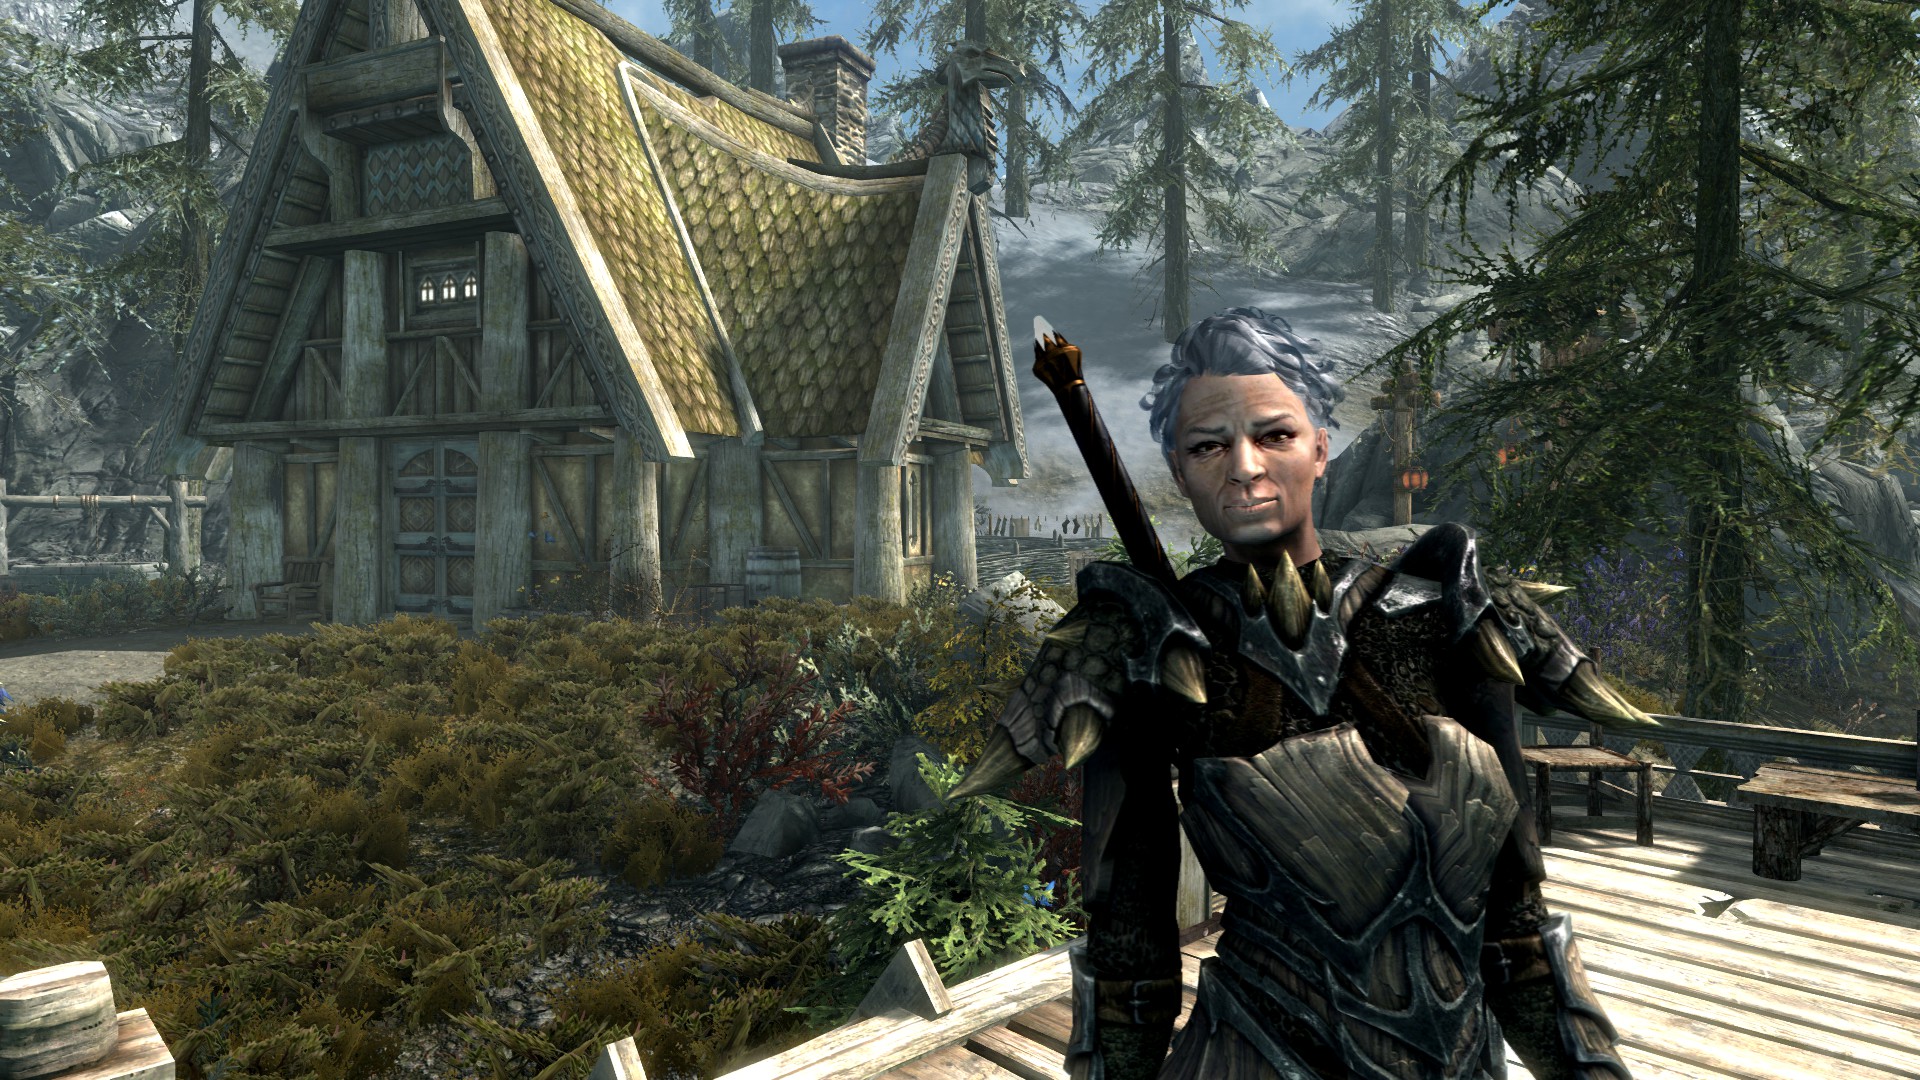 Shirley Curry, the Skyrim Grandma, with a two-handed sword on her back